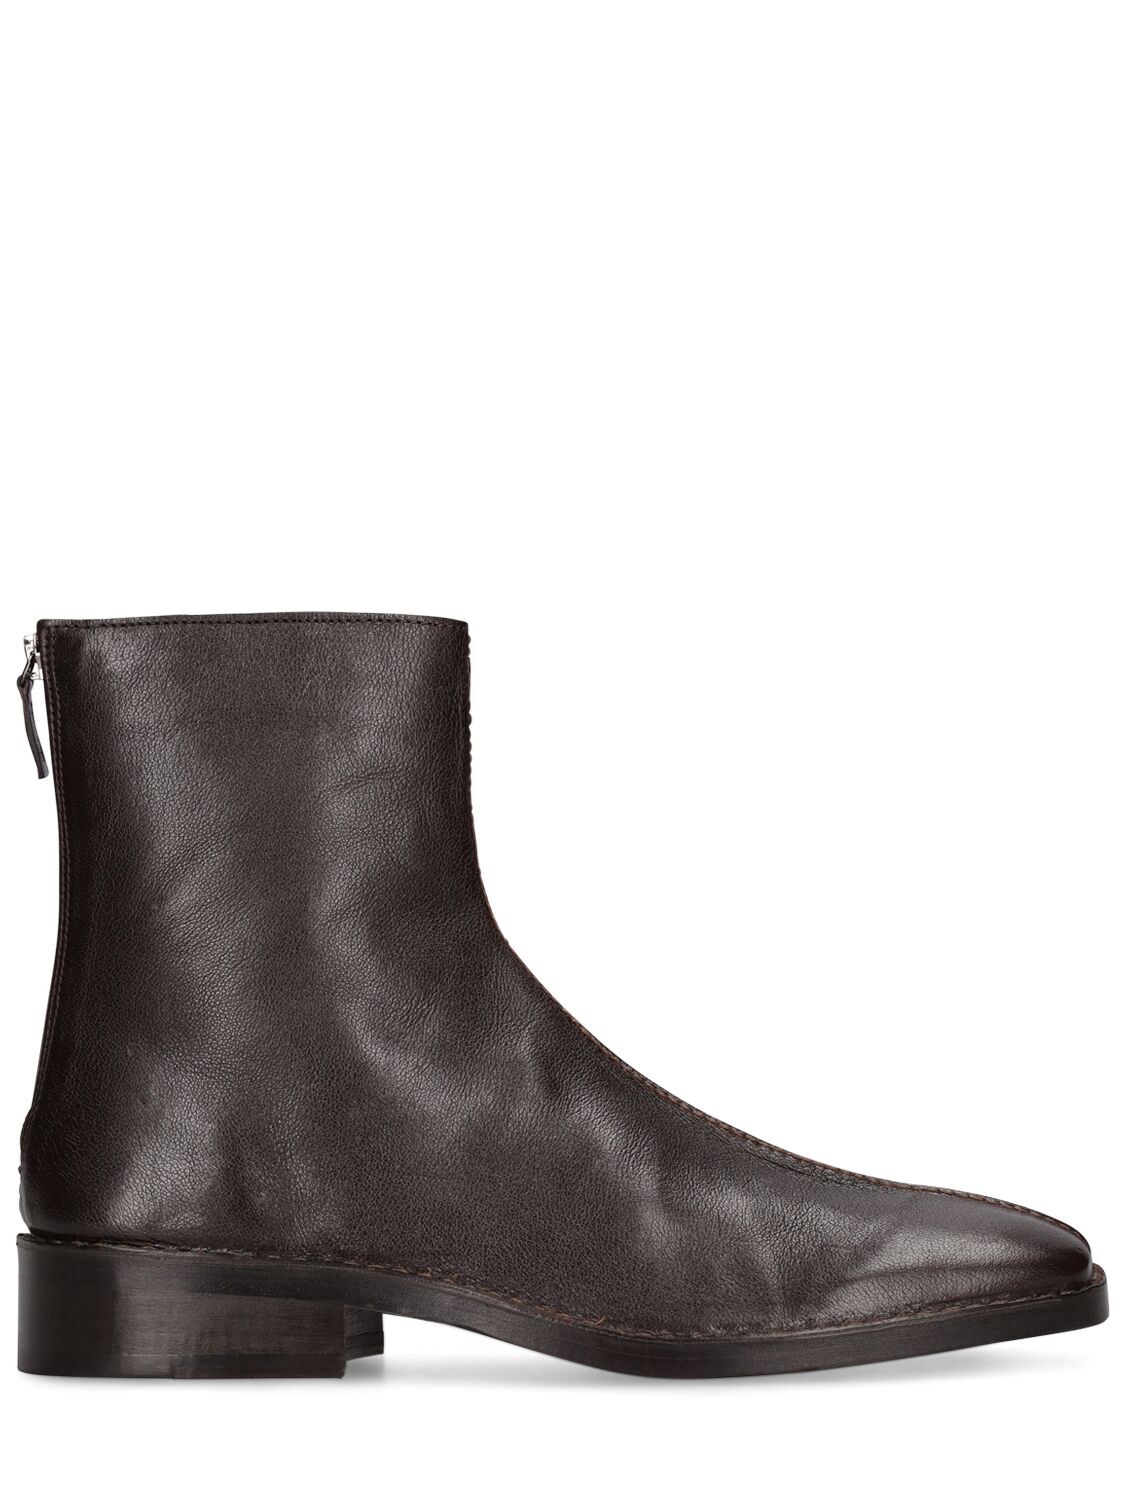 Lemaire Leather Zip Ankle Boots In Dark Brown